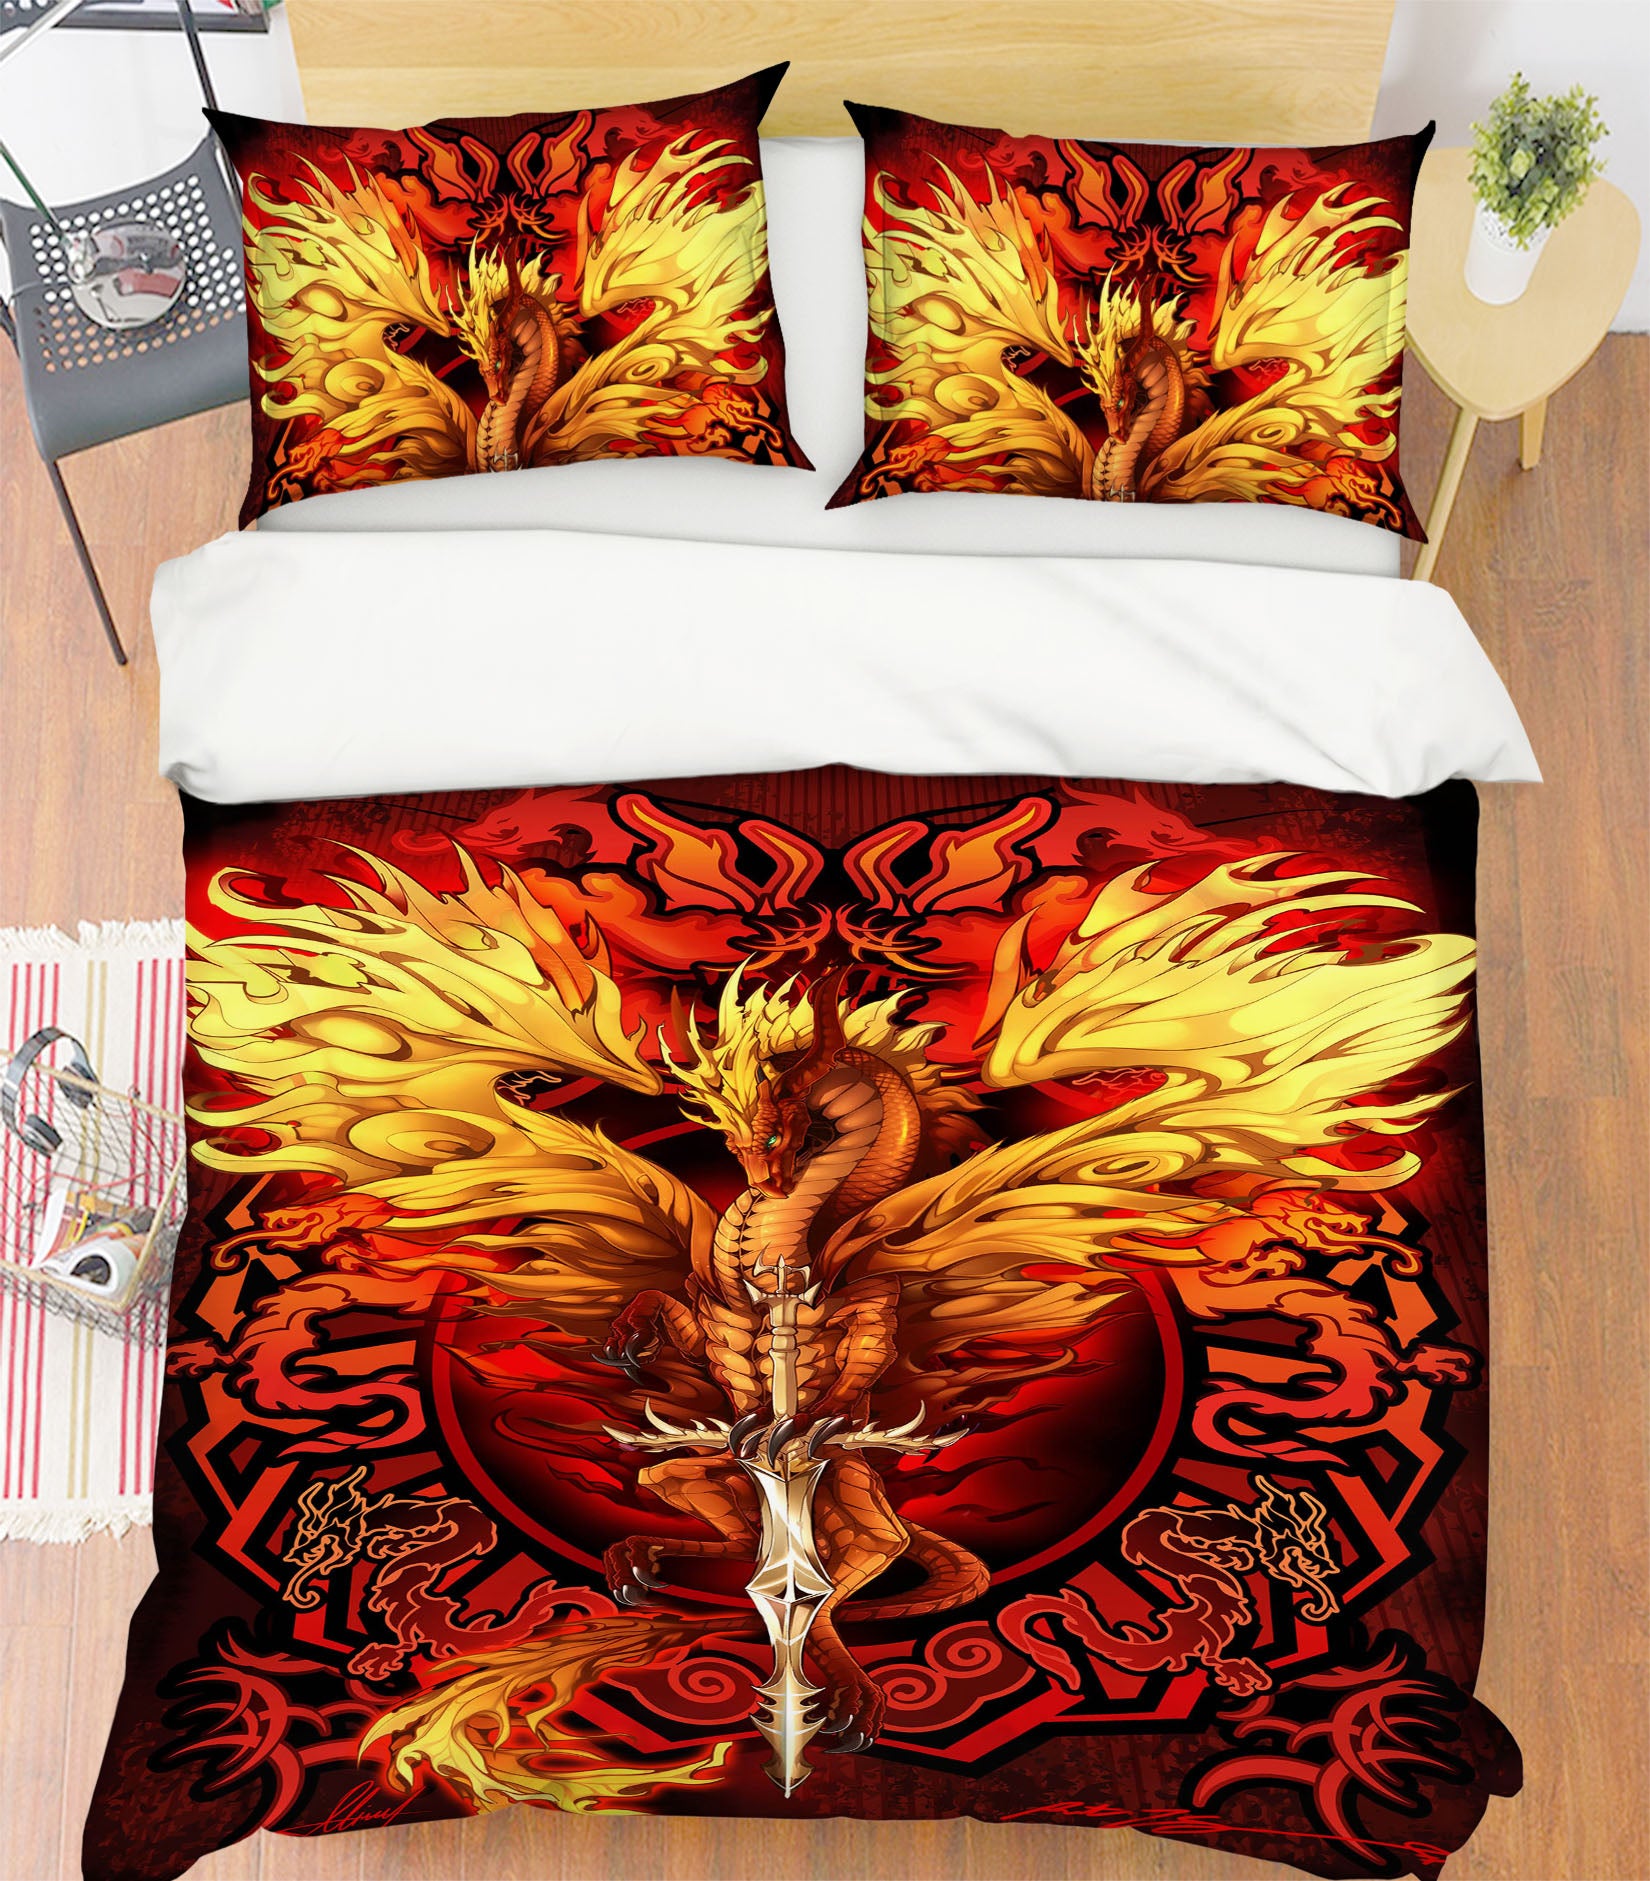 3D Dragon Pattern 8323 Ruth Thompson Bedding Bed Pillowcases Quilt Cover Duvet Cover